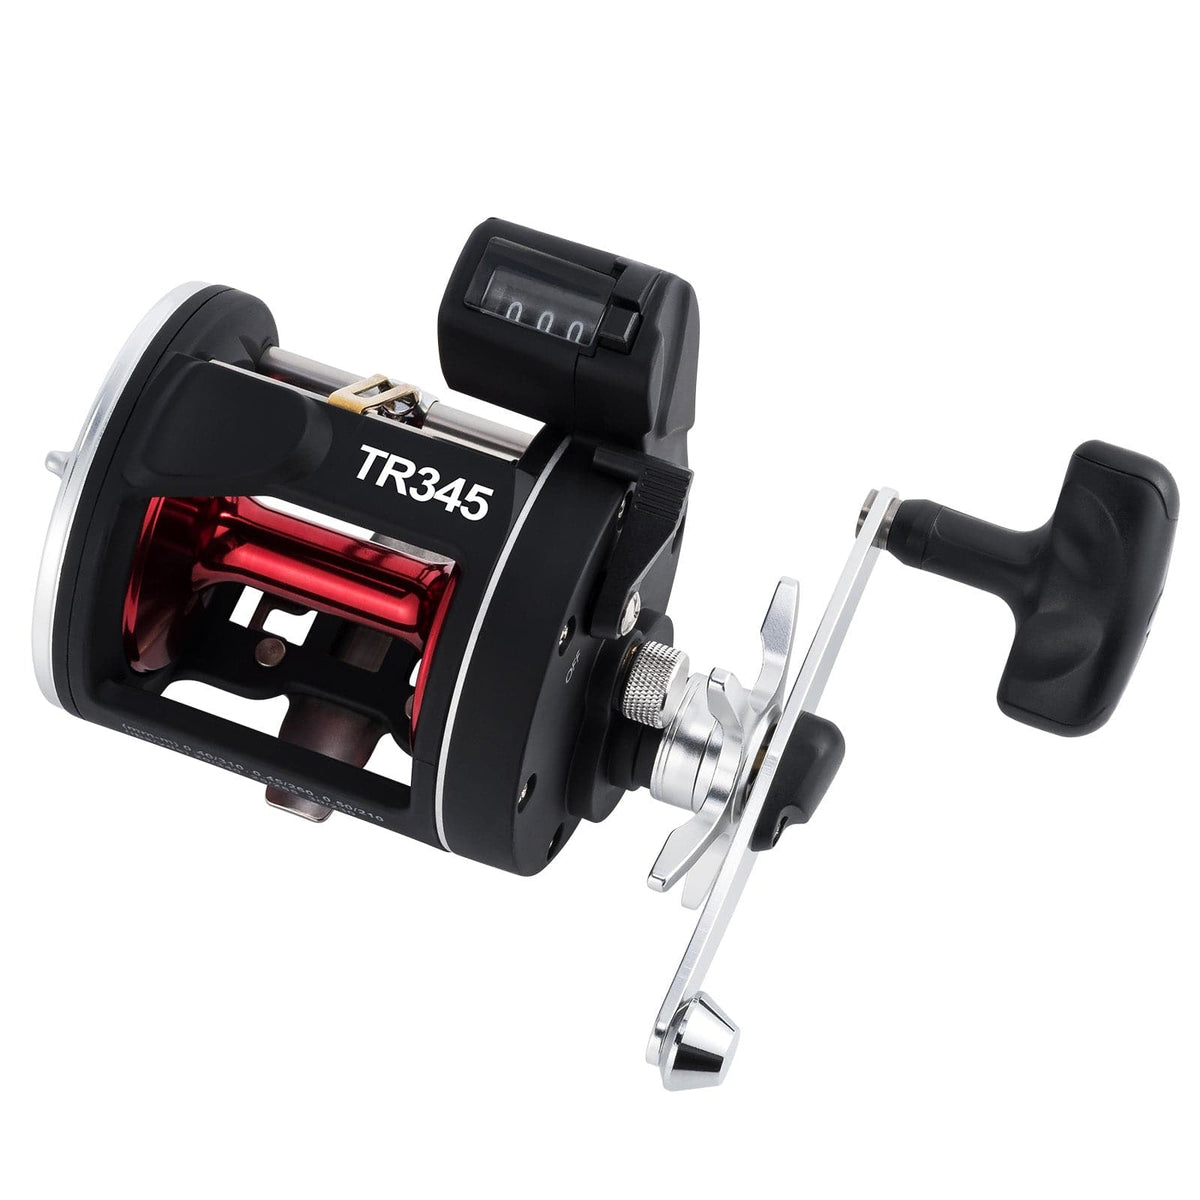 Dr.Fish Baitcasting Reels with Line Counter (2+1 BBS,18LB MAX Drag)